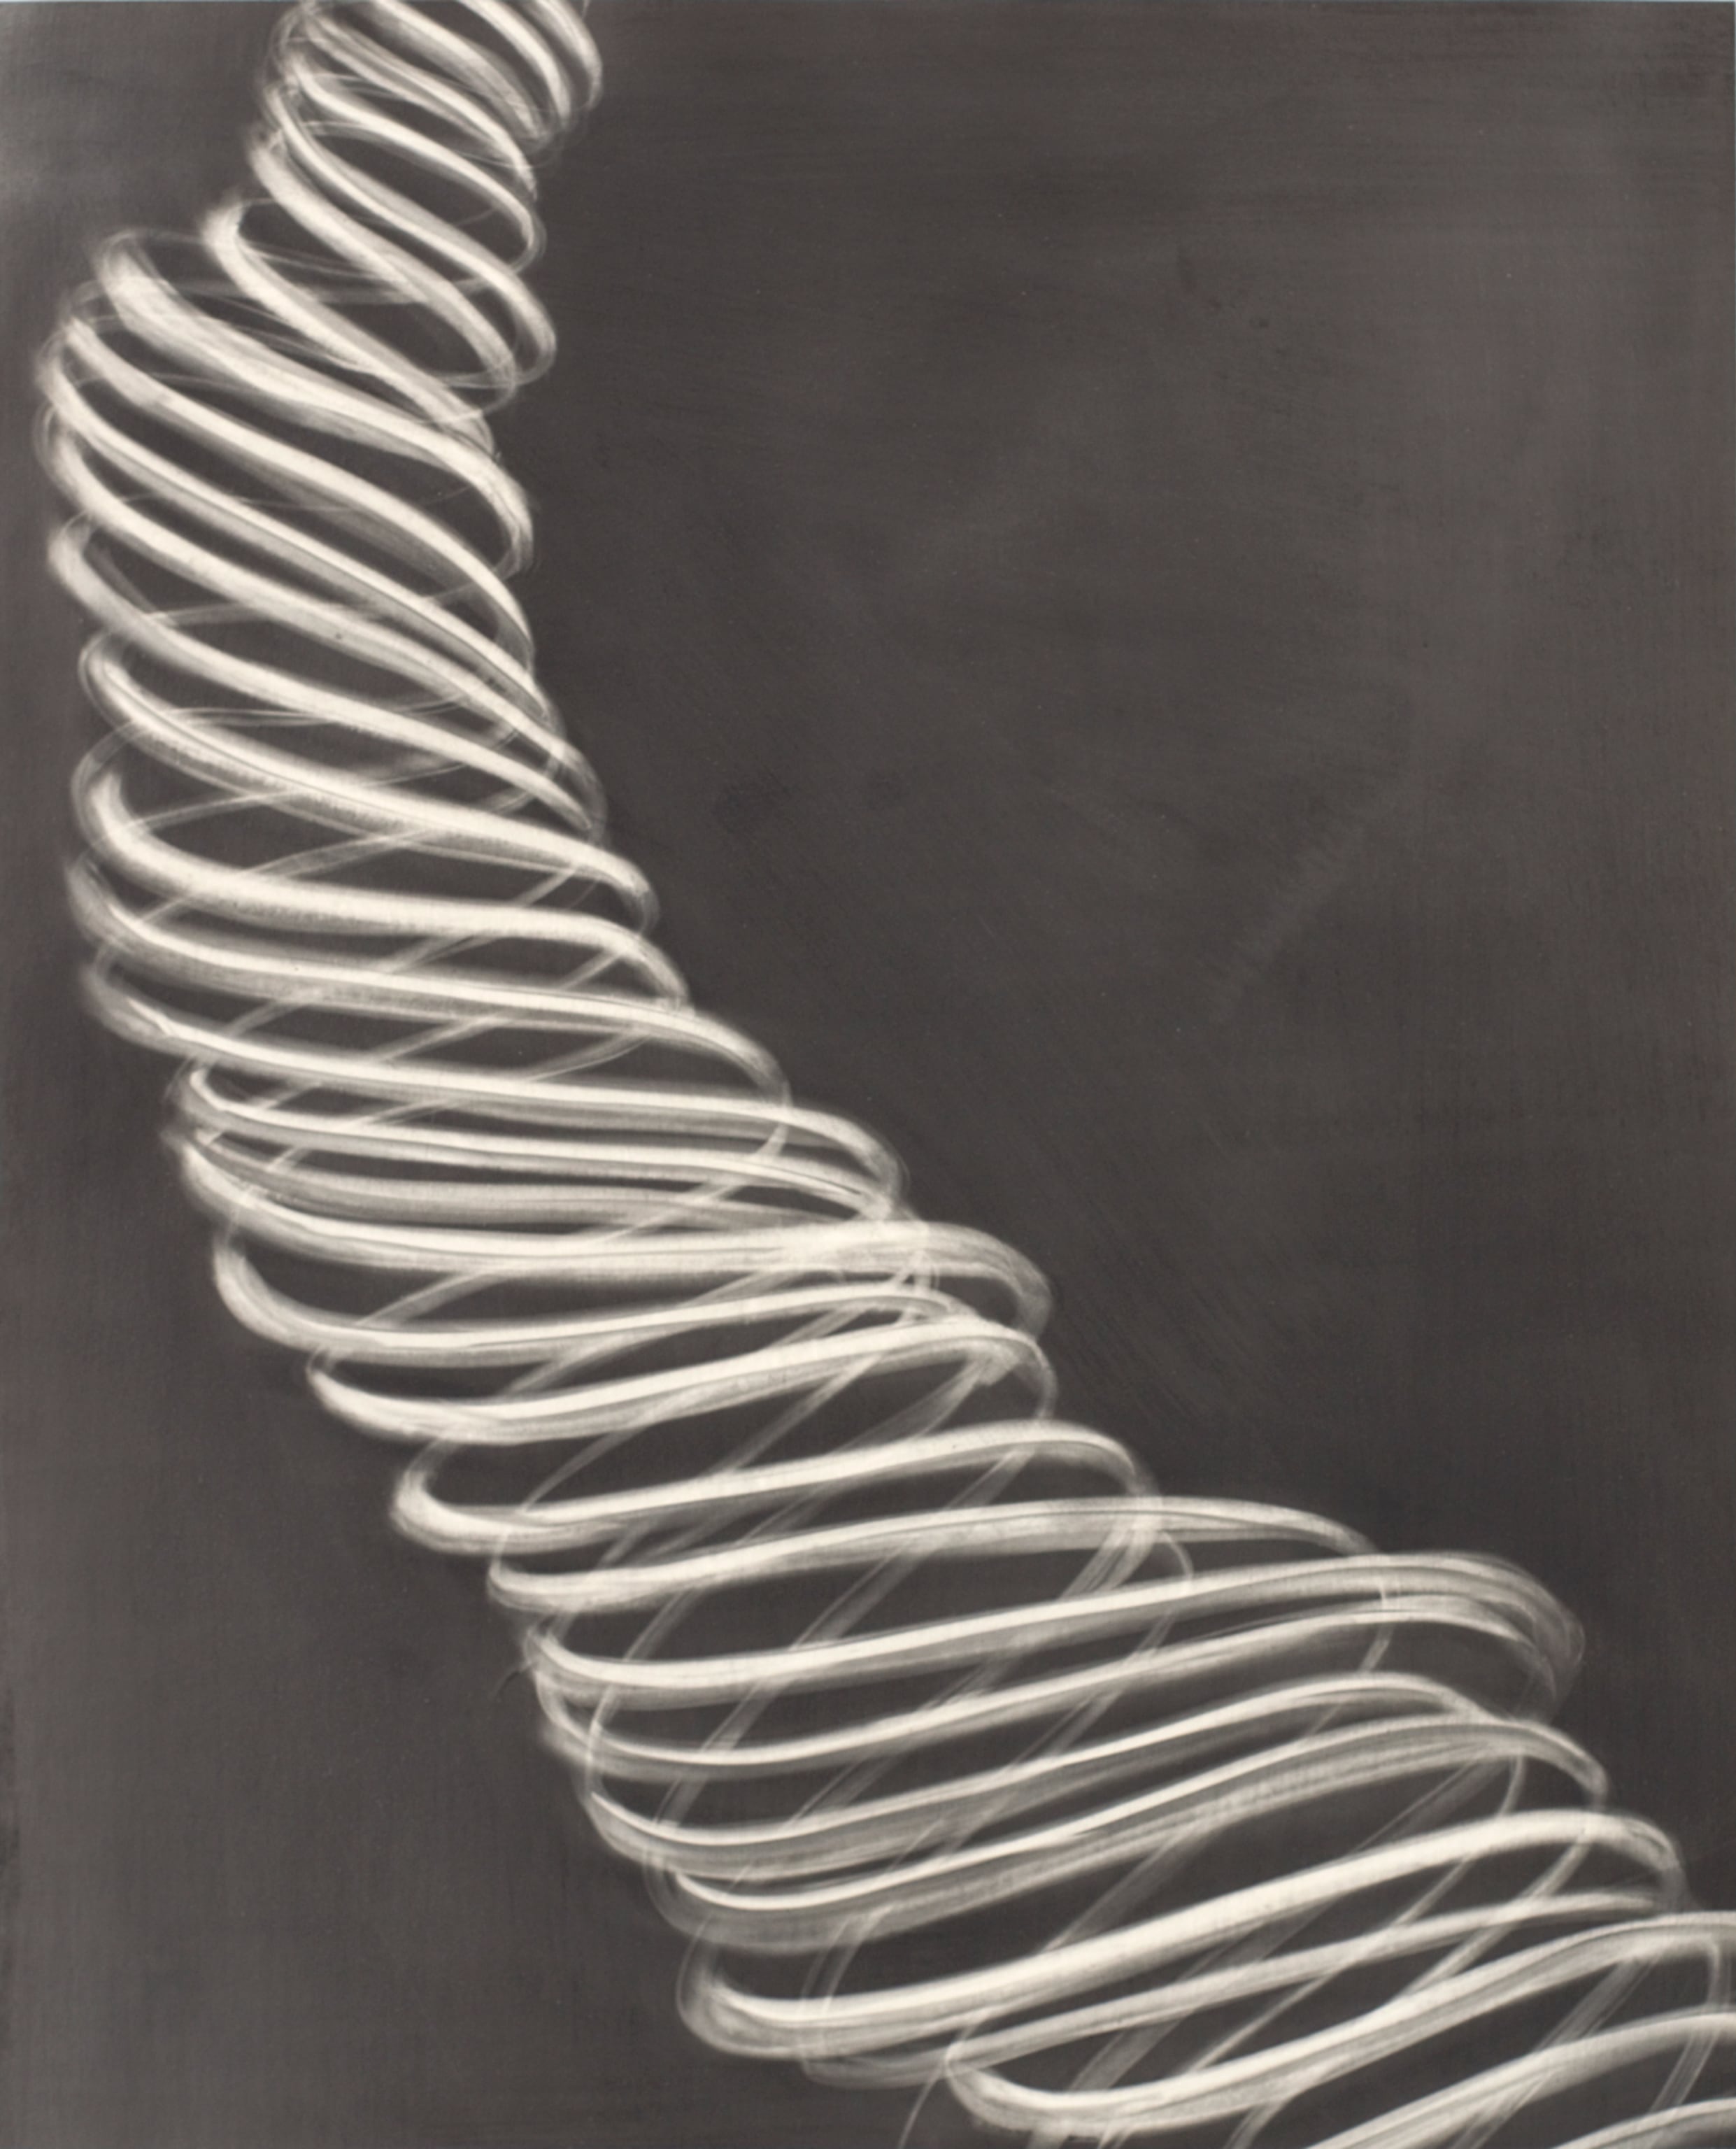 University, 16 x 13 inches, oil, alkyd and graphite on paper, 2015